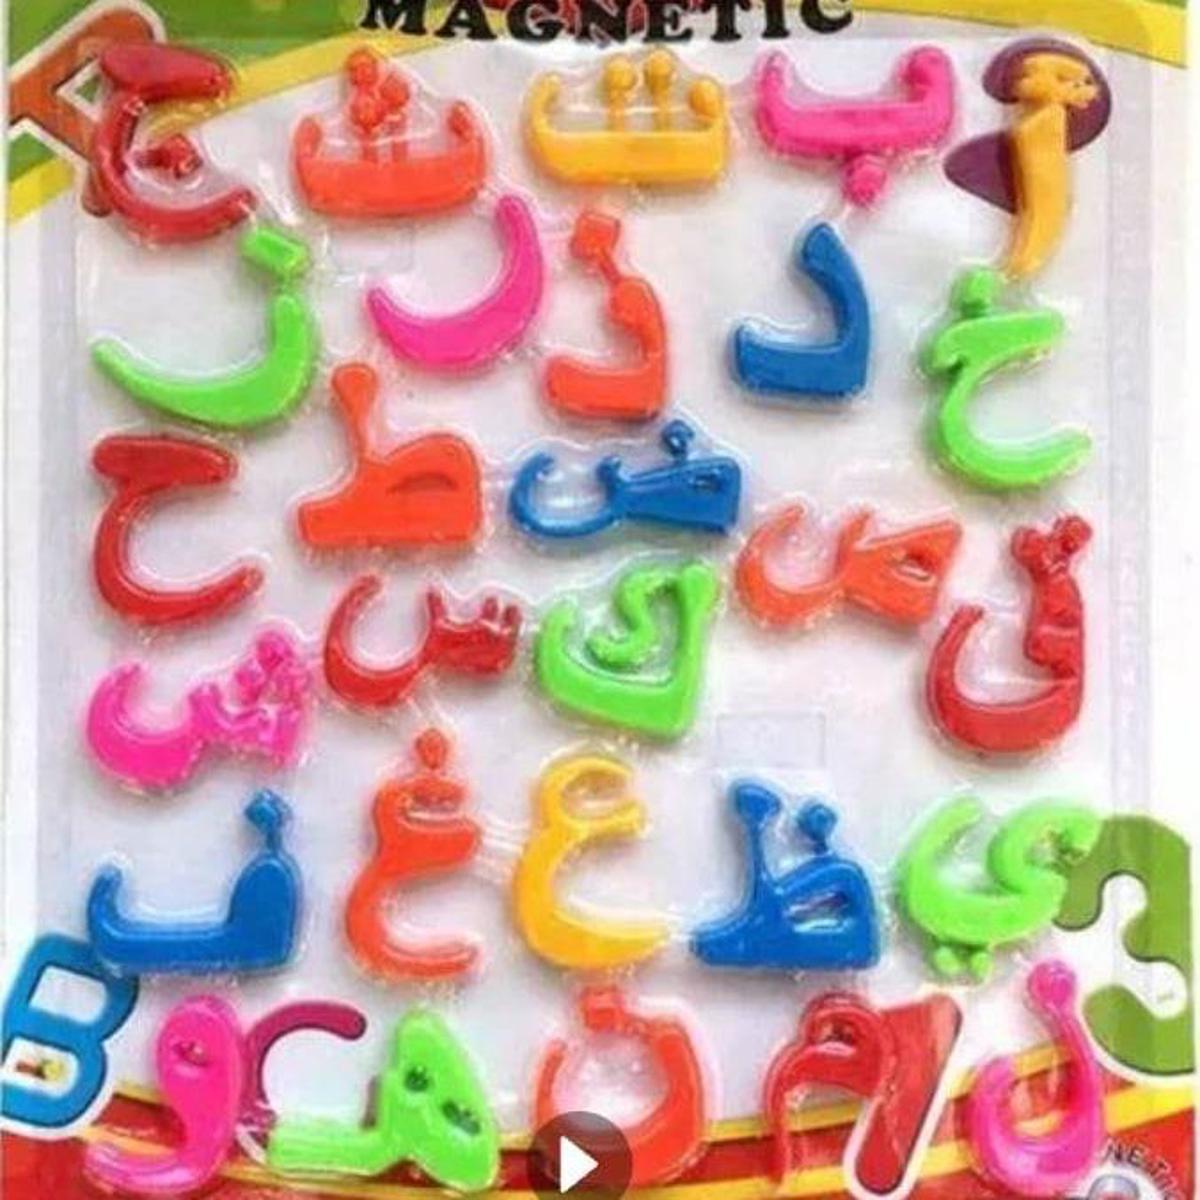 Arabic Letters Blocks Toys, Learning Puzzle For Kids